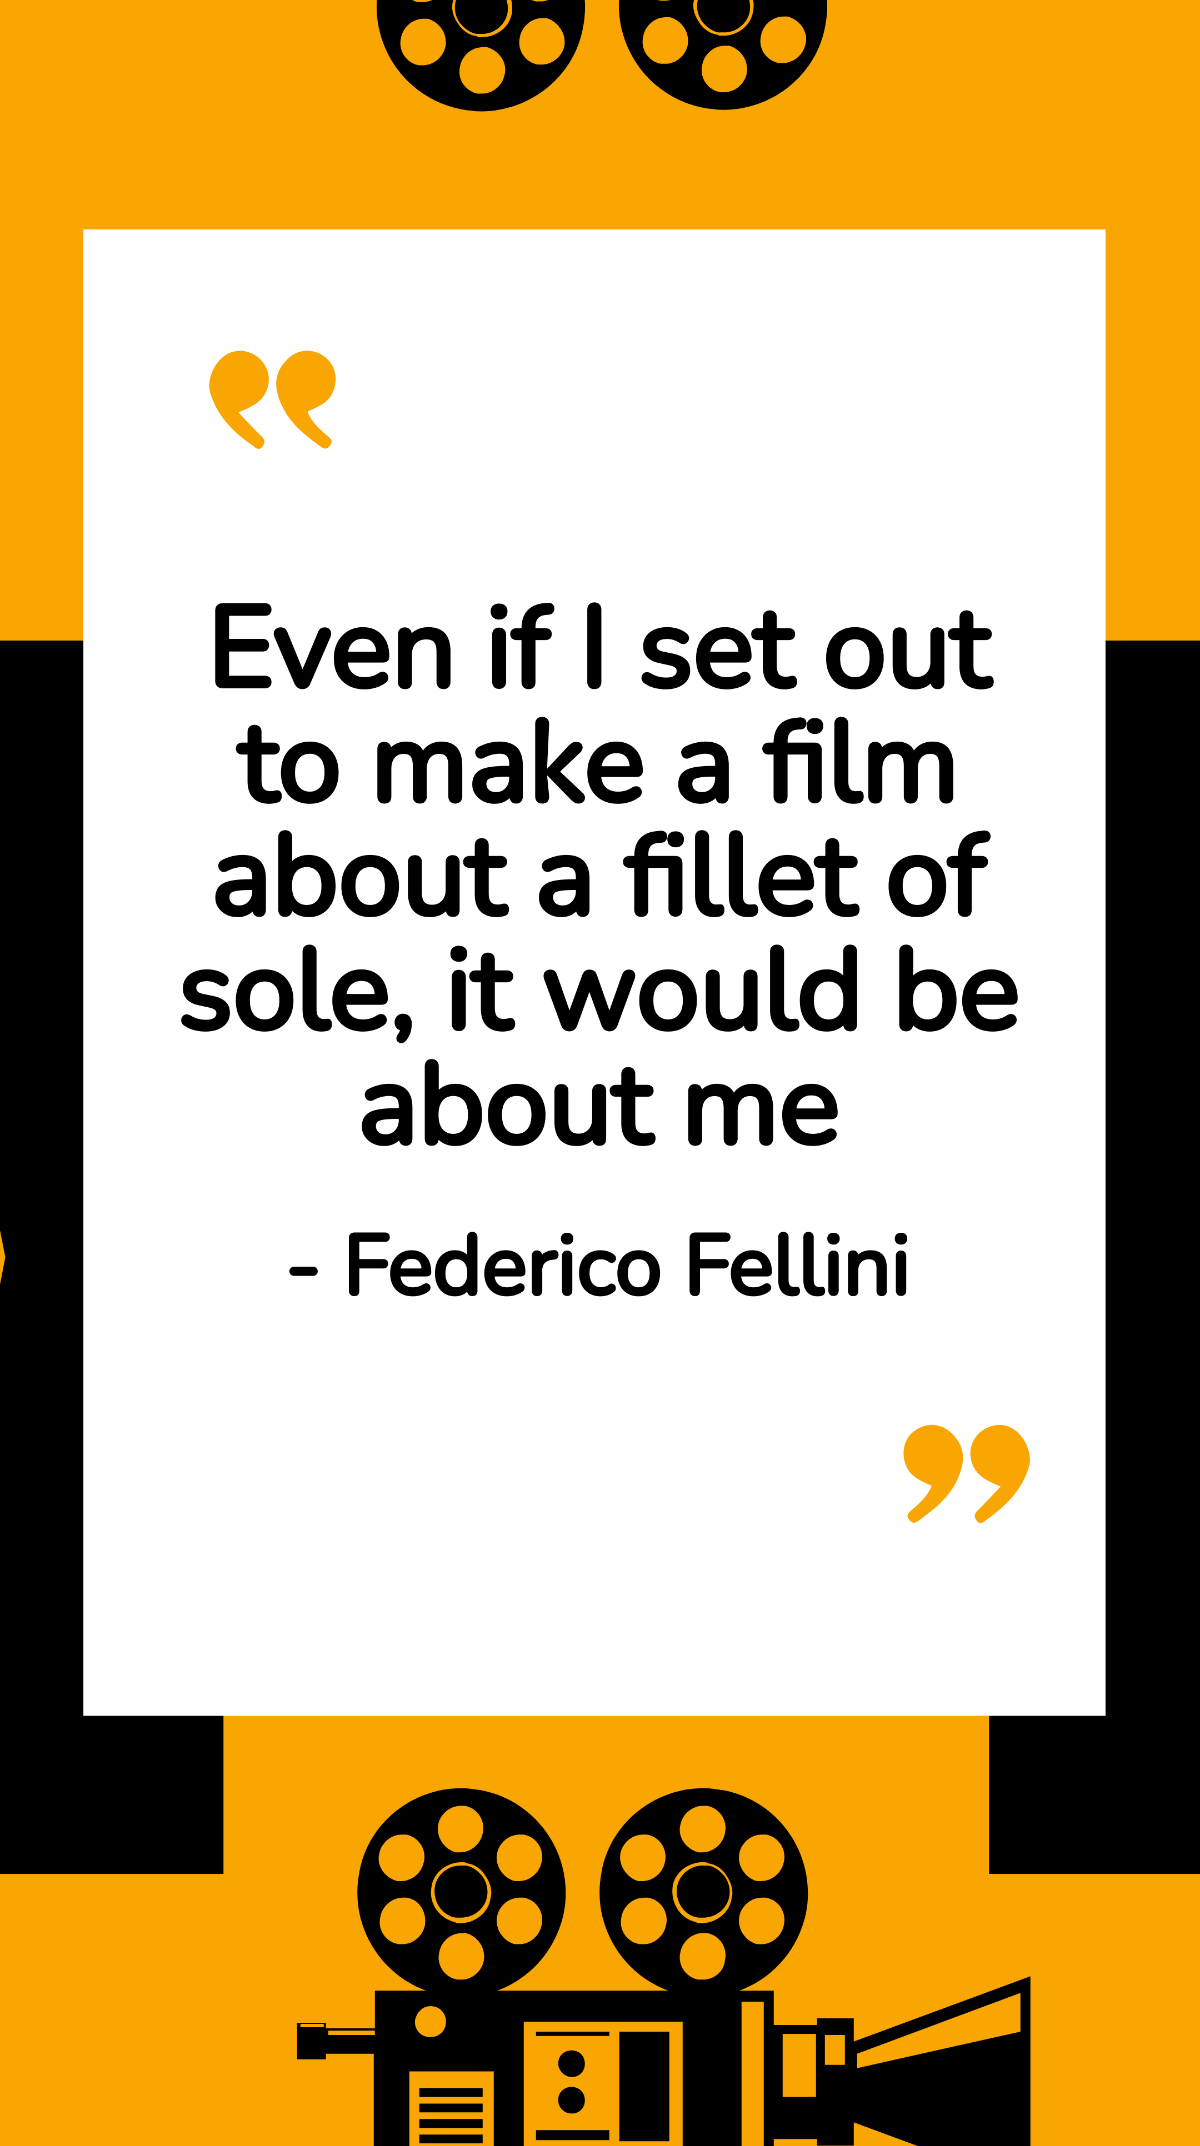 Federico Fellini - Even if I set out to make a film about a fillet of sole, it would be about me Template